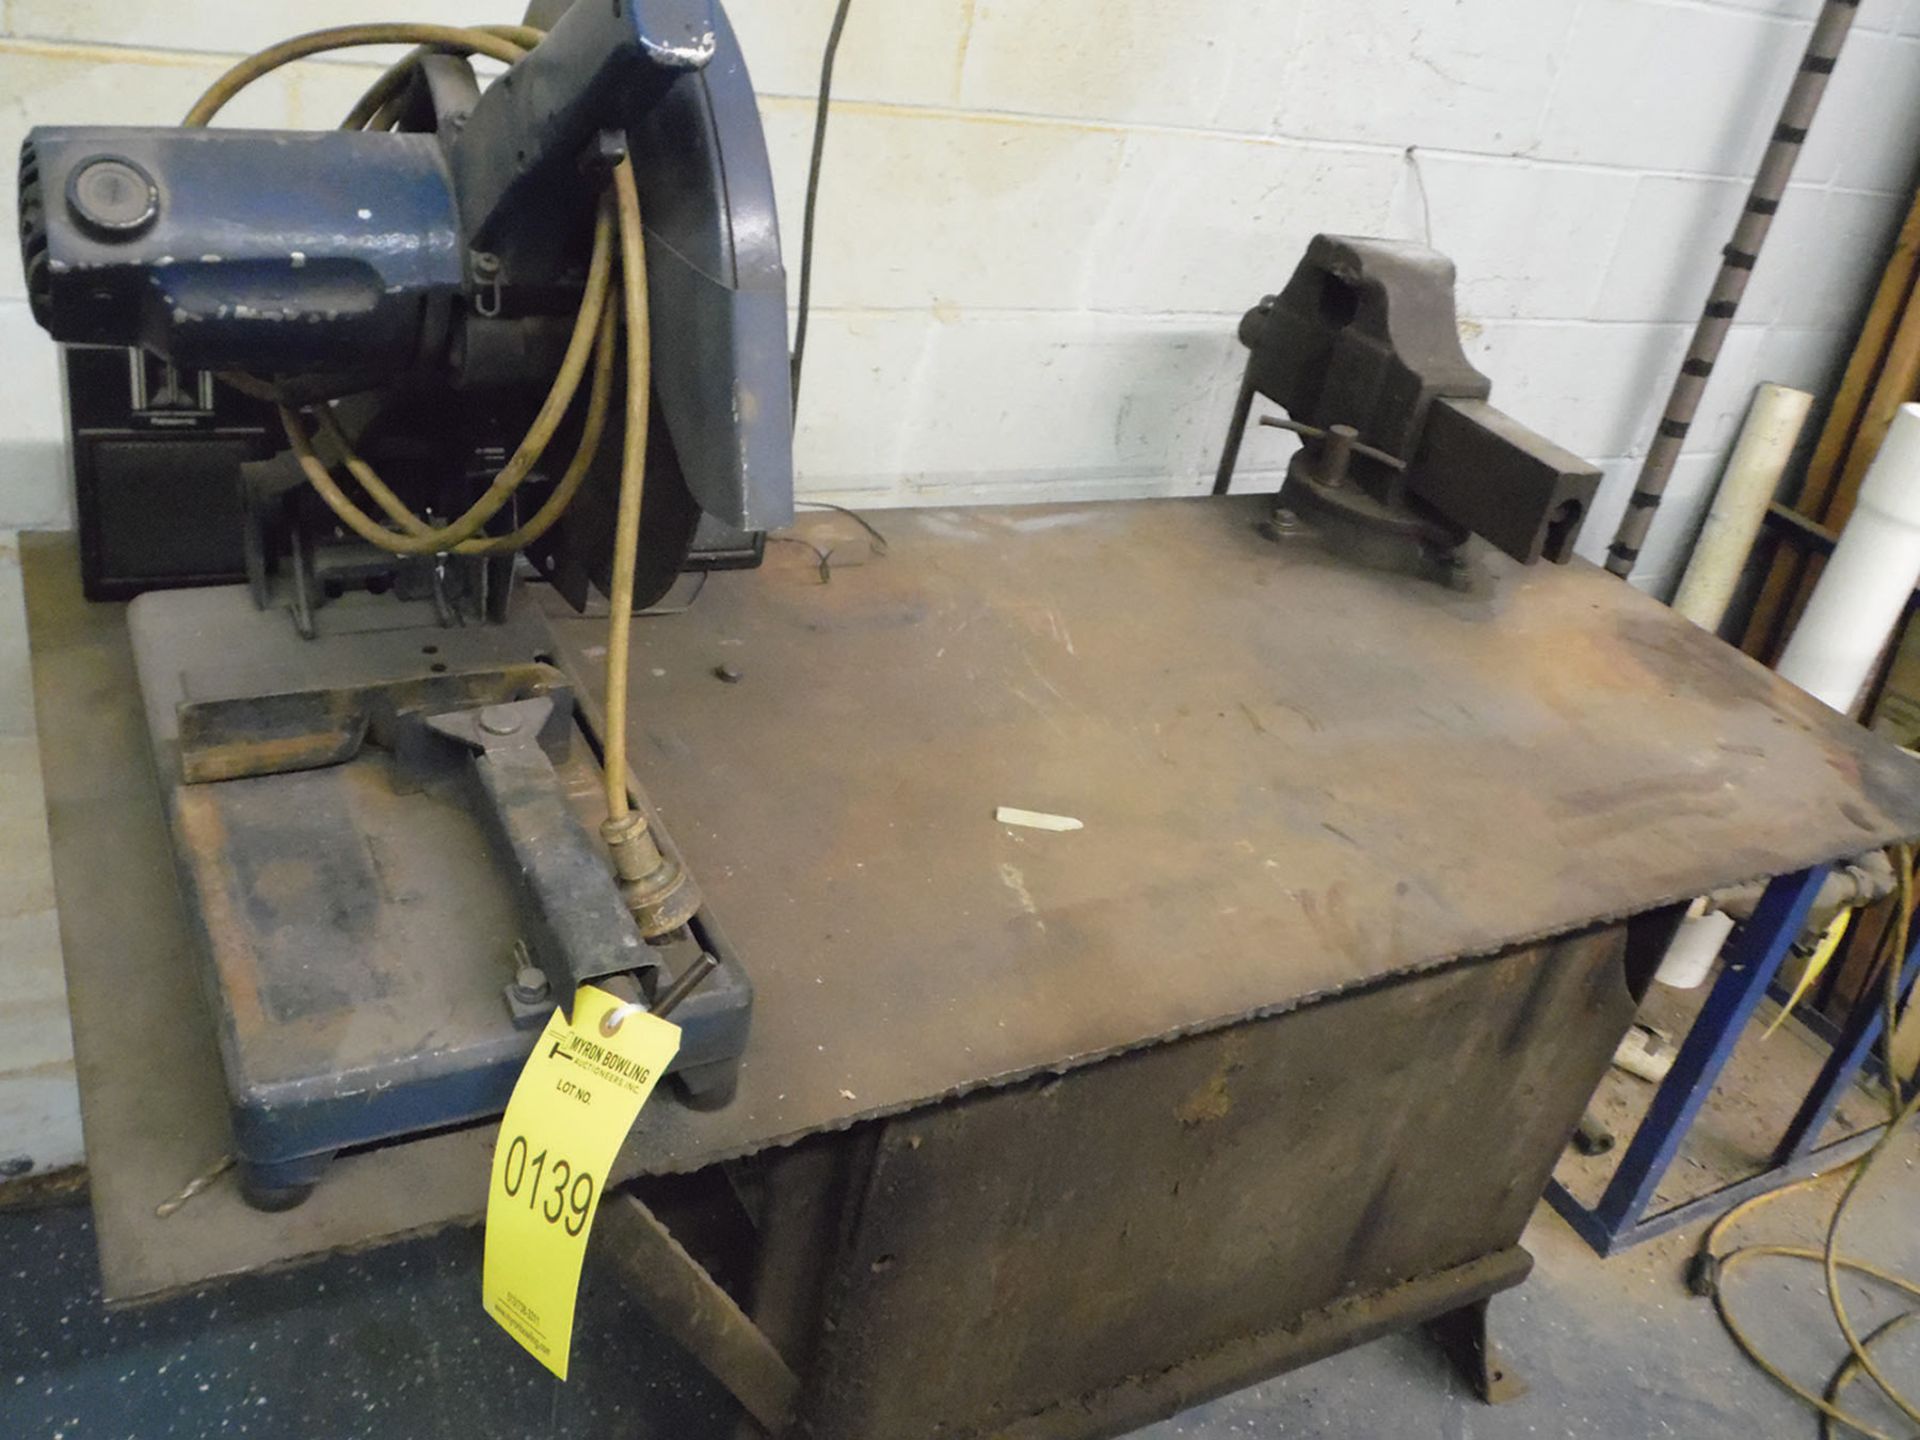 STEEL TABLE 28'' X 58'', HITACHI 12'' ABRASIVE CHOP SAW, AND 5'' BENCH VISE